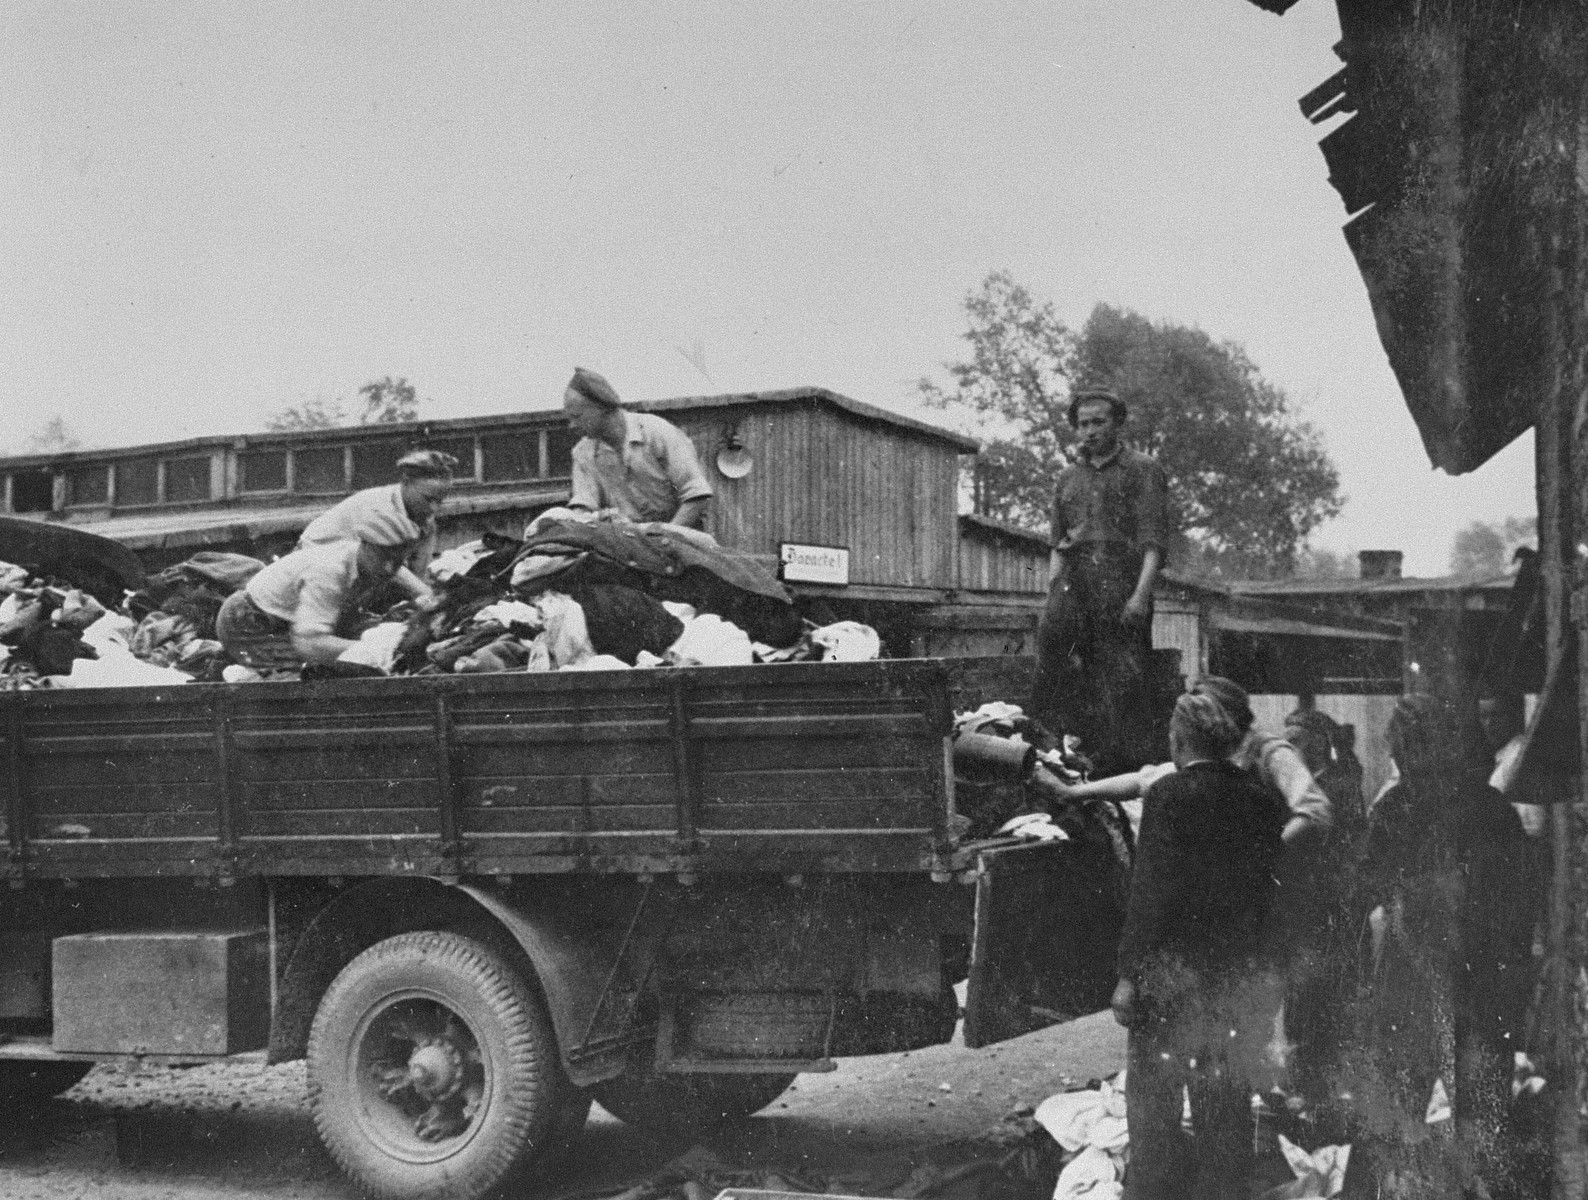 Prisoners in the Aufräumungskommando (order commandos) unload the confiscated property of a transport of Jews from Subcarpathian Rus at a warehouse in Auschwitz-Birkenau.

The camp prisoners came to refer to the looted property as "Kanada," associating it with the riches symbolized by Kanada.  The members of this commando were almost exclusively Jews.  "Kanada" storage facilities occupied several dozen barracks and other buildings around the camp.  The looted property was funneled from Auschwitz through an extensive distribution network that served many individuals and various economic branches of the Third Reich.